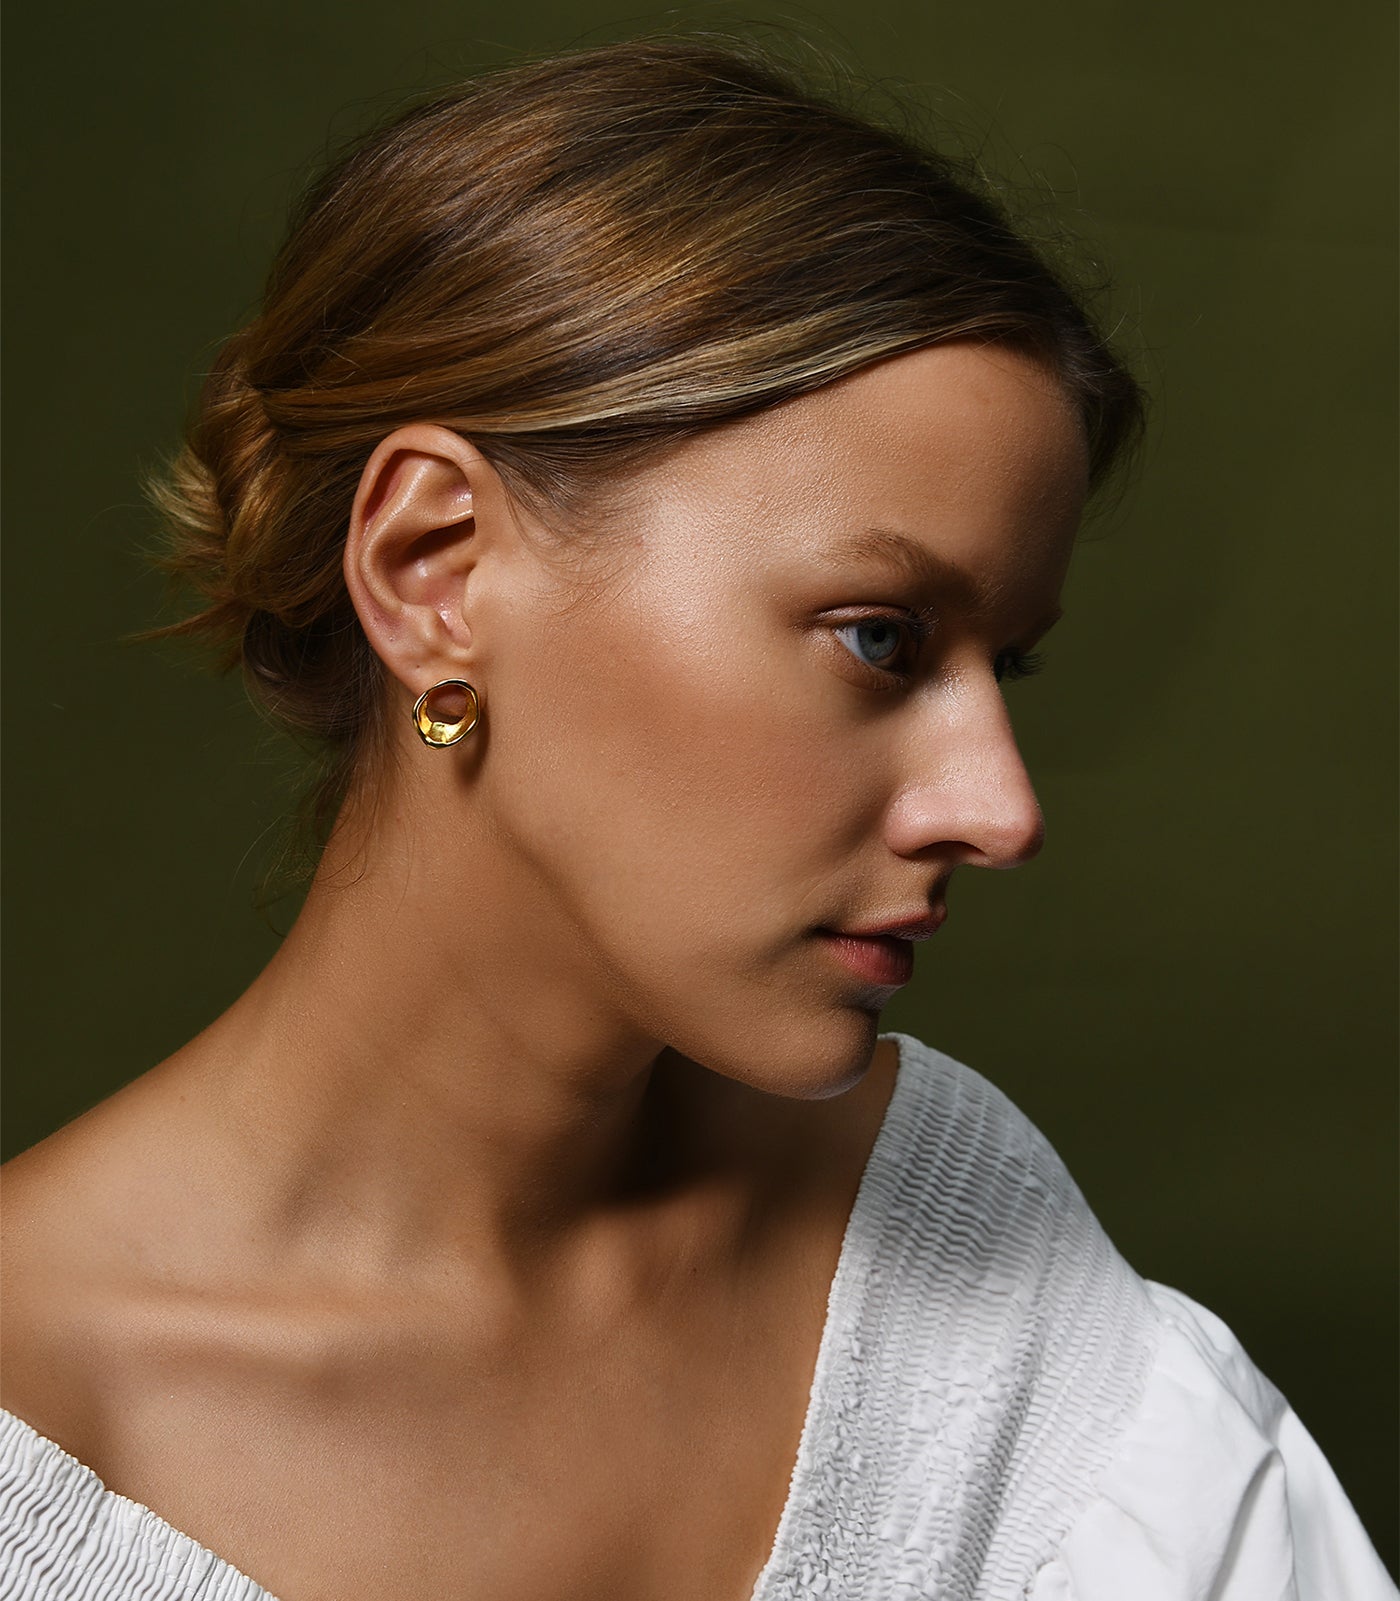 A model wears a gold vermeil circle stud earring. The earring has an organic shape similar to the movement of flowing water.